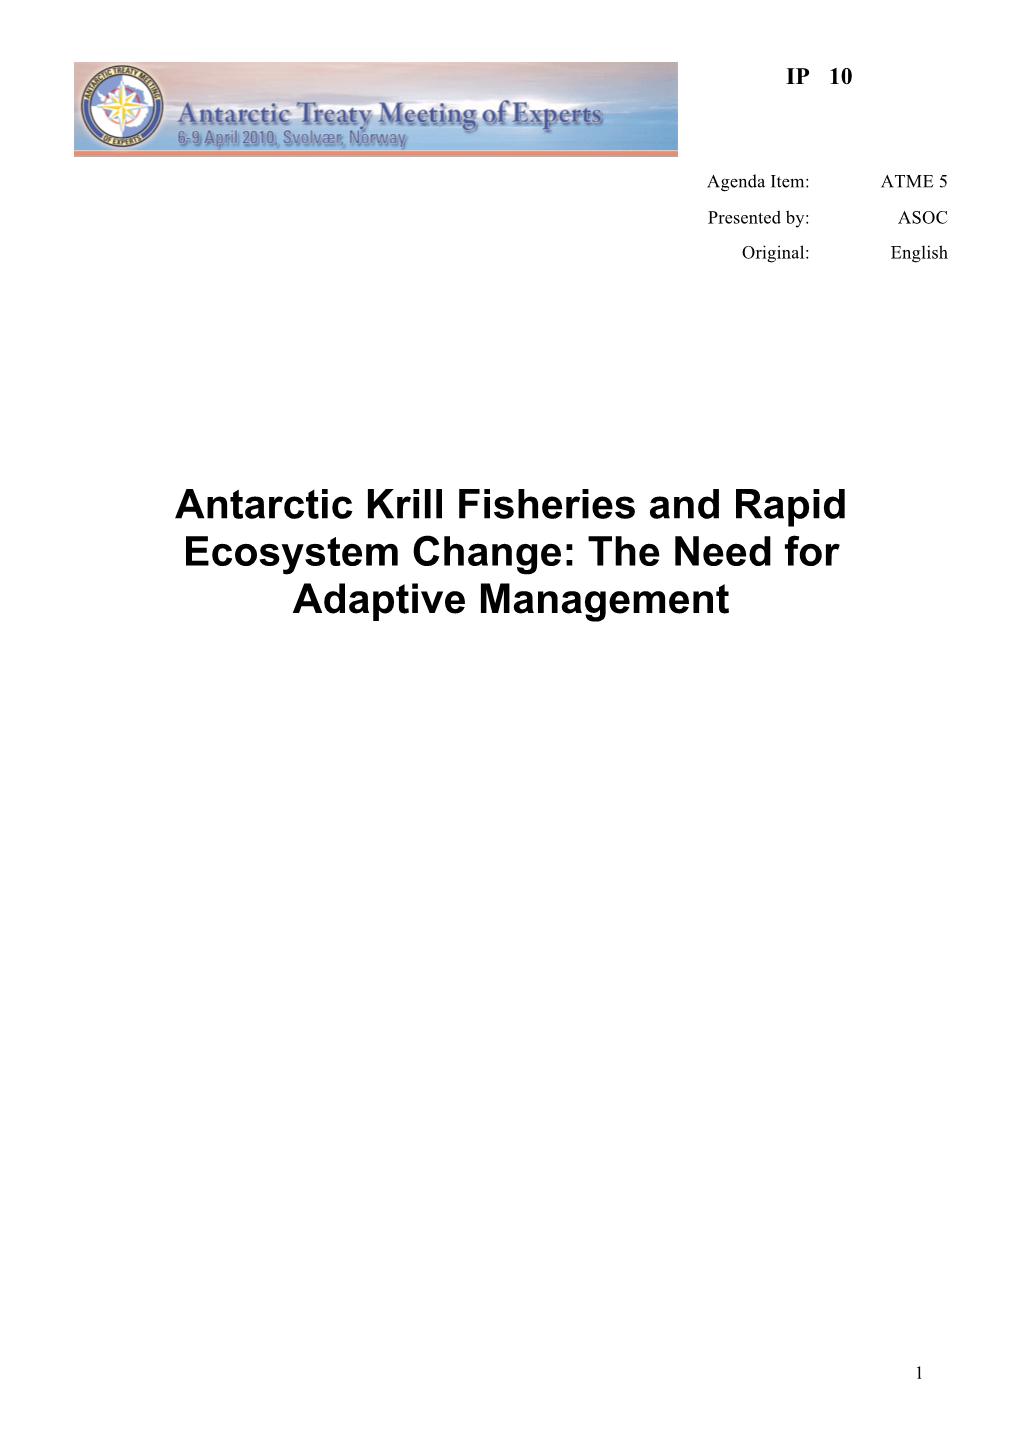 Antarctic Krill Fisheries and Rapid Ecosystem Change: the Need for Adaptive Management